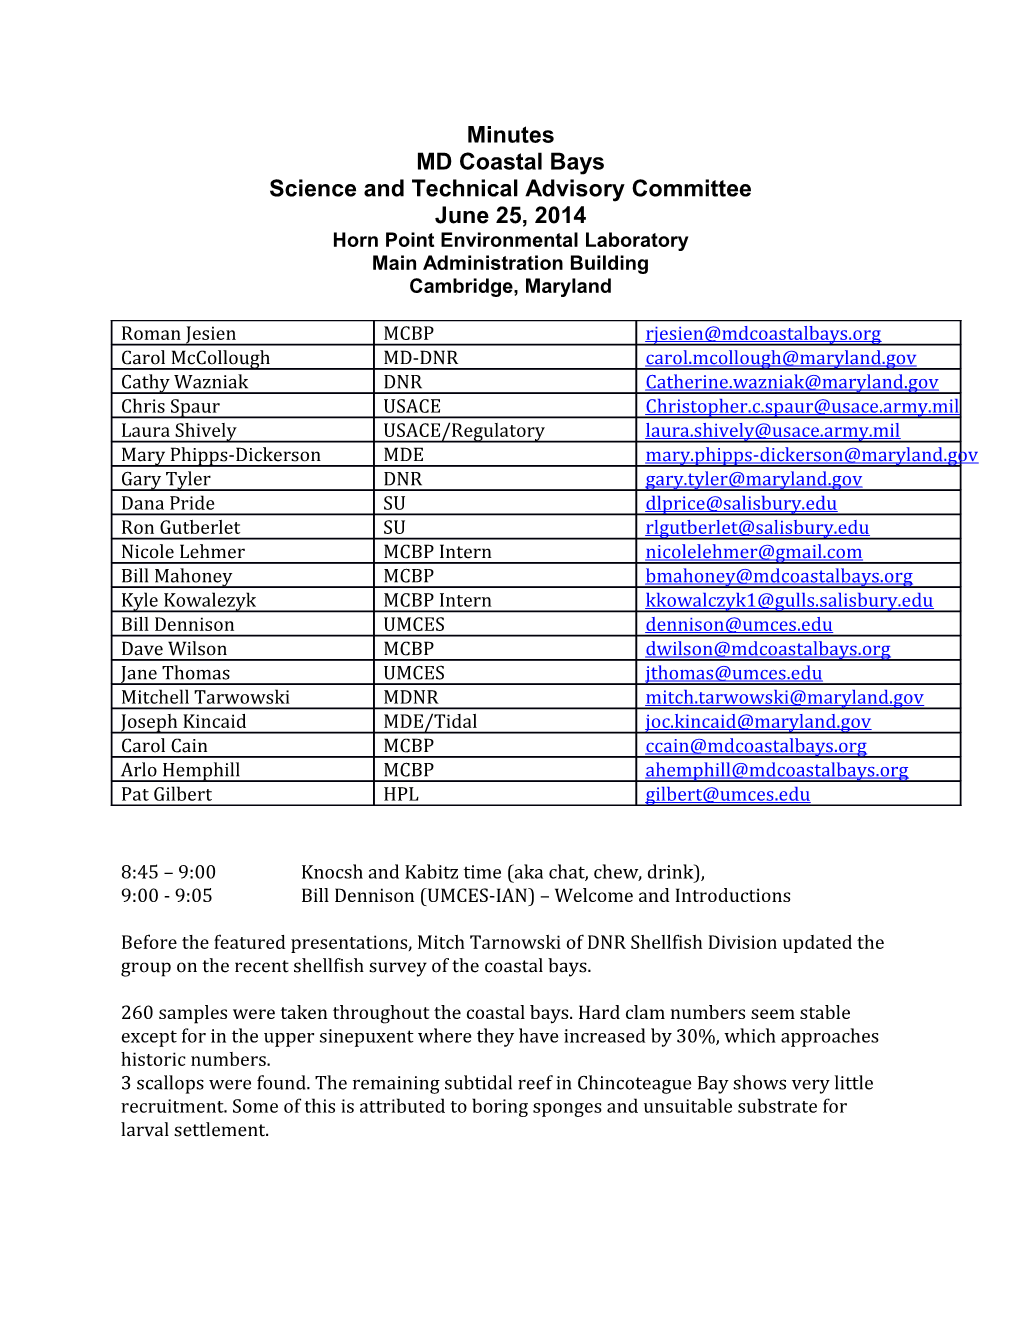 Science and Technical Advisory Committee